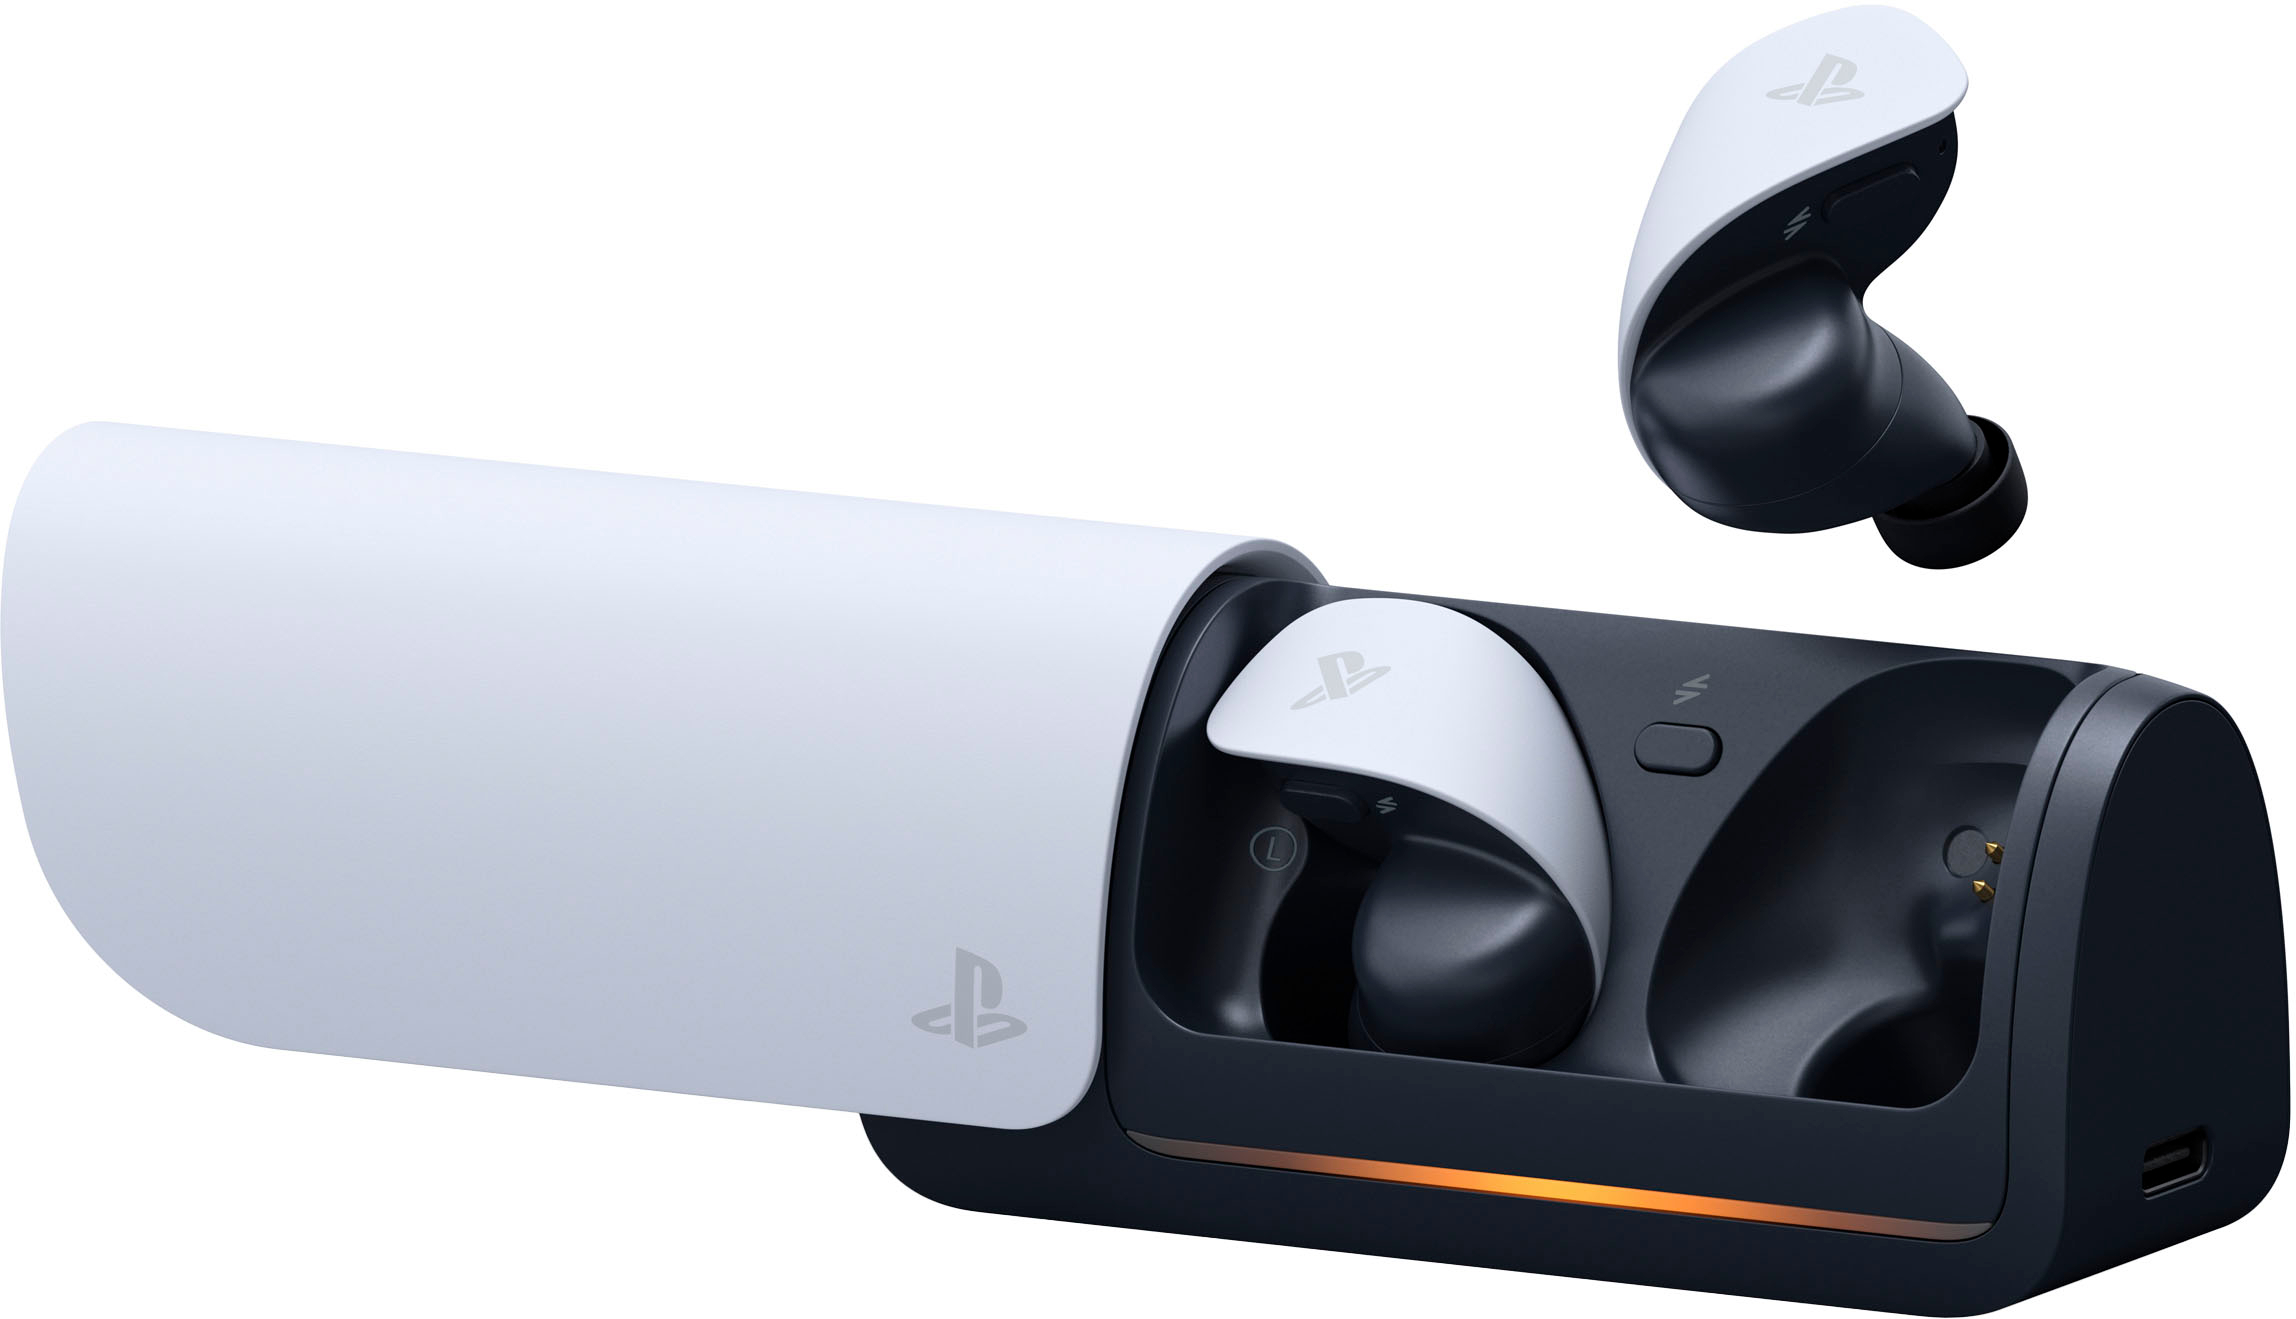 🔥NEW Sony PULSE Explore Wireless Earbuds – White PlayStation 5 / PS5  (PRESALE) – Tacos Y Mas